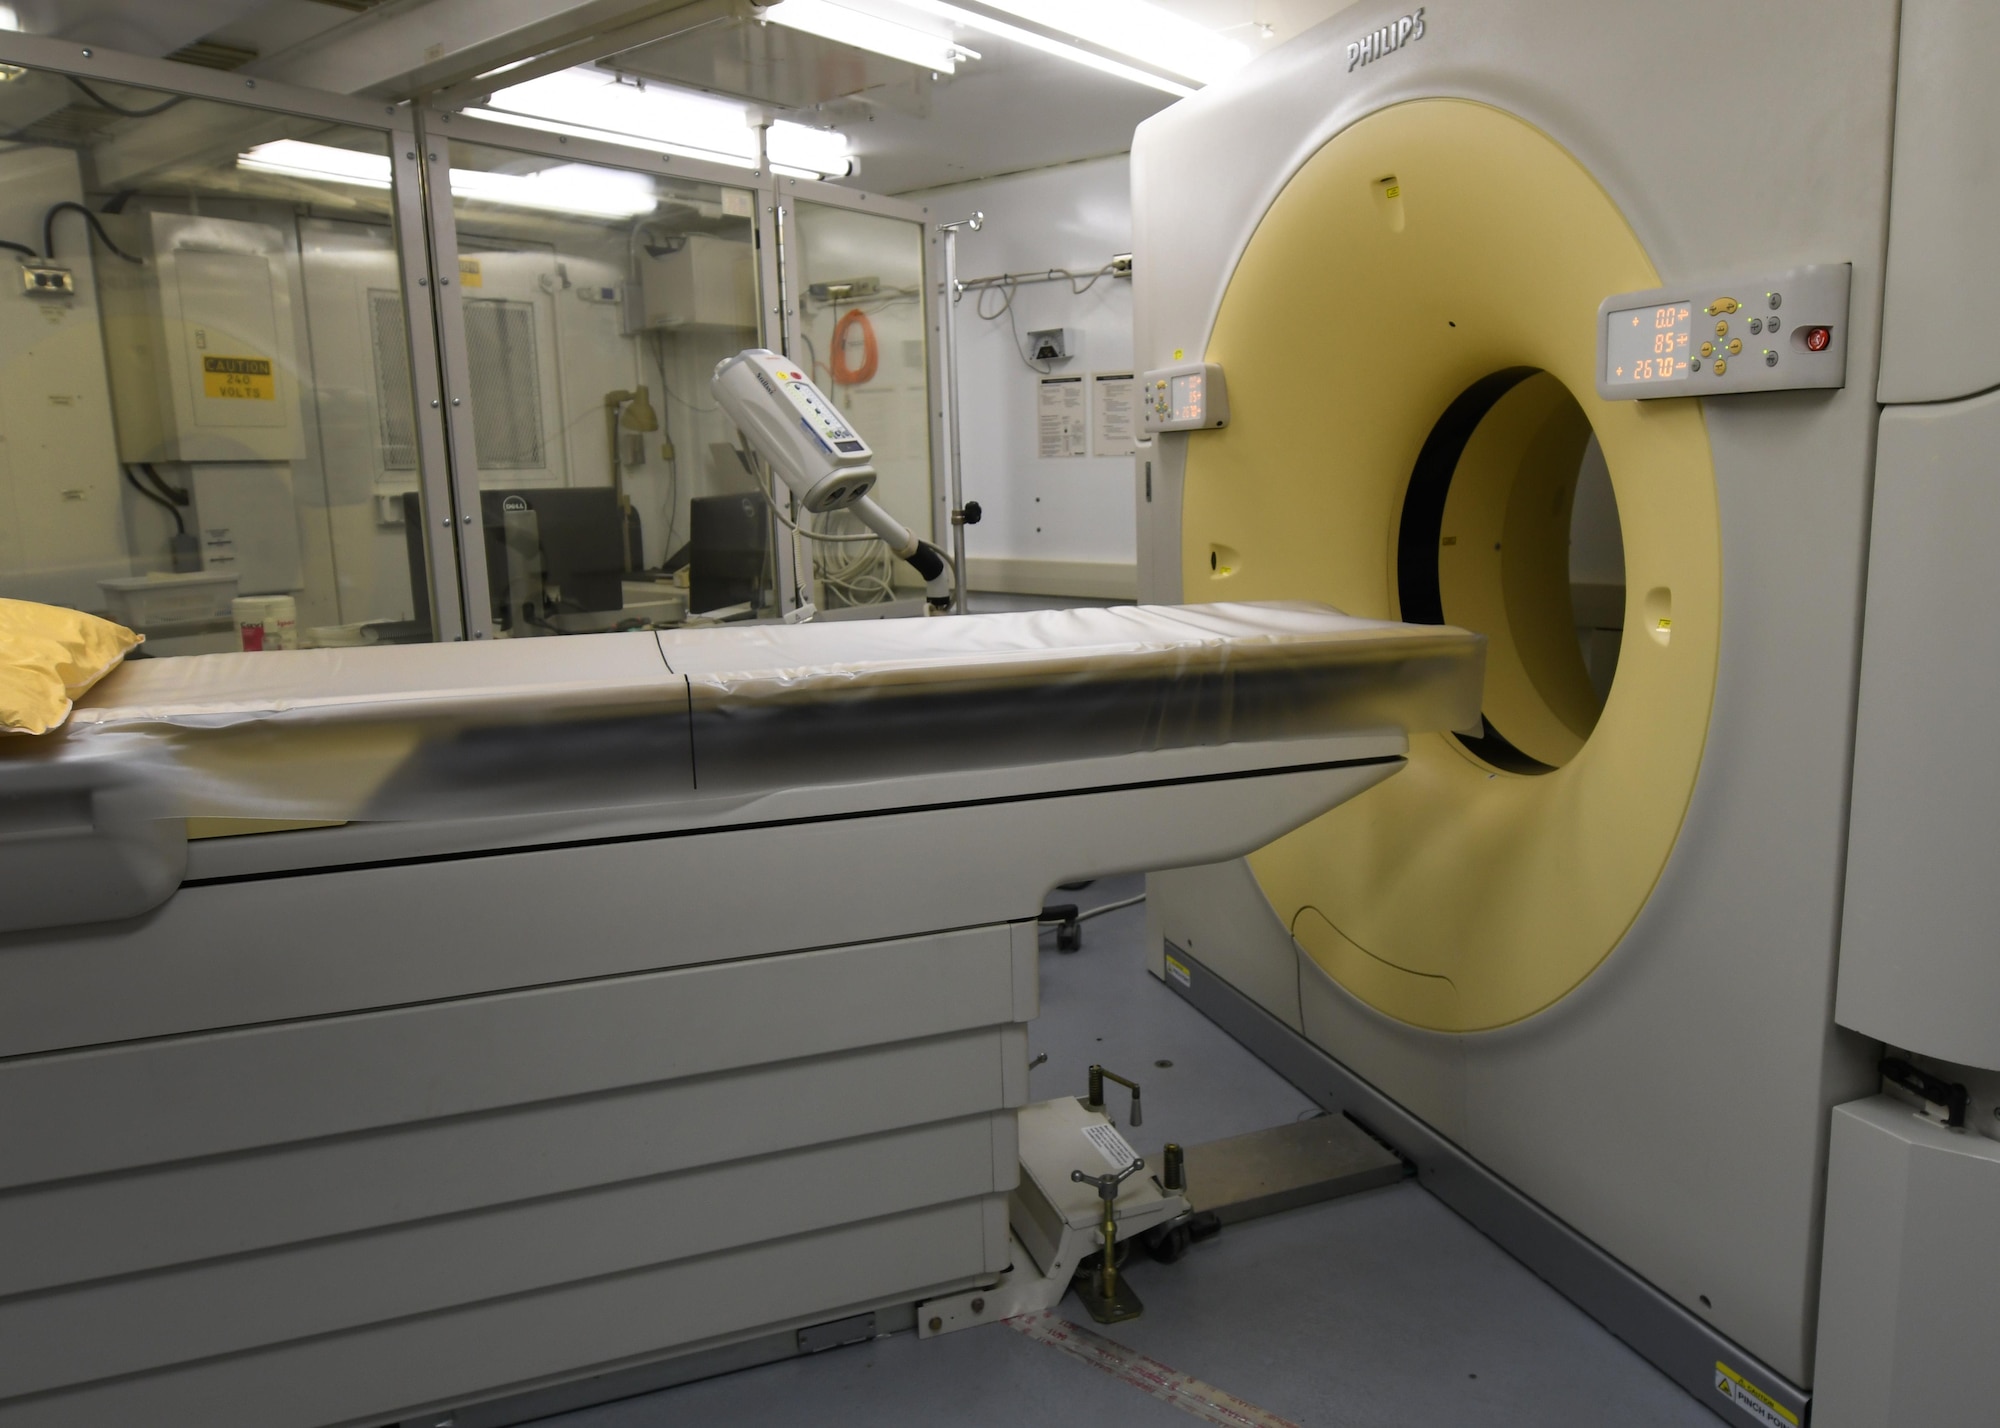 A newly installed Computed Tomography scanner is ready to use at Al Udeid Air Base, Qatar, Nov. 21, 2016. The CT scanner enables the doctors with the 379th Expeditionary Medical Group to quickly and accurately diagnose patients. (U.S. Air Force Photo by Senior Airman Miles Wilson)